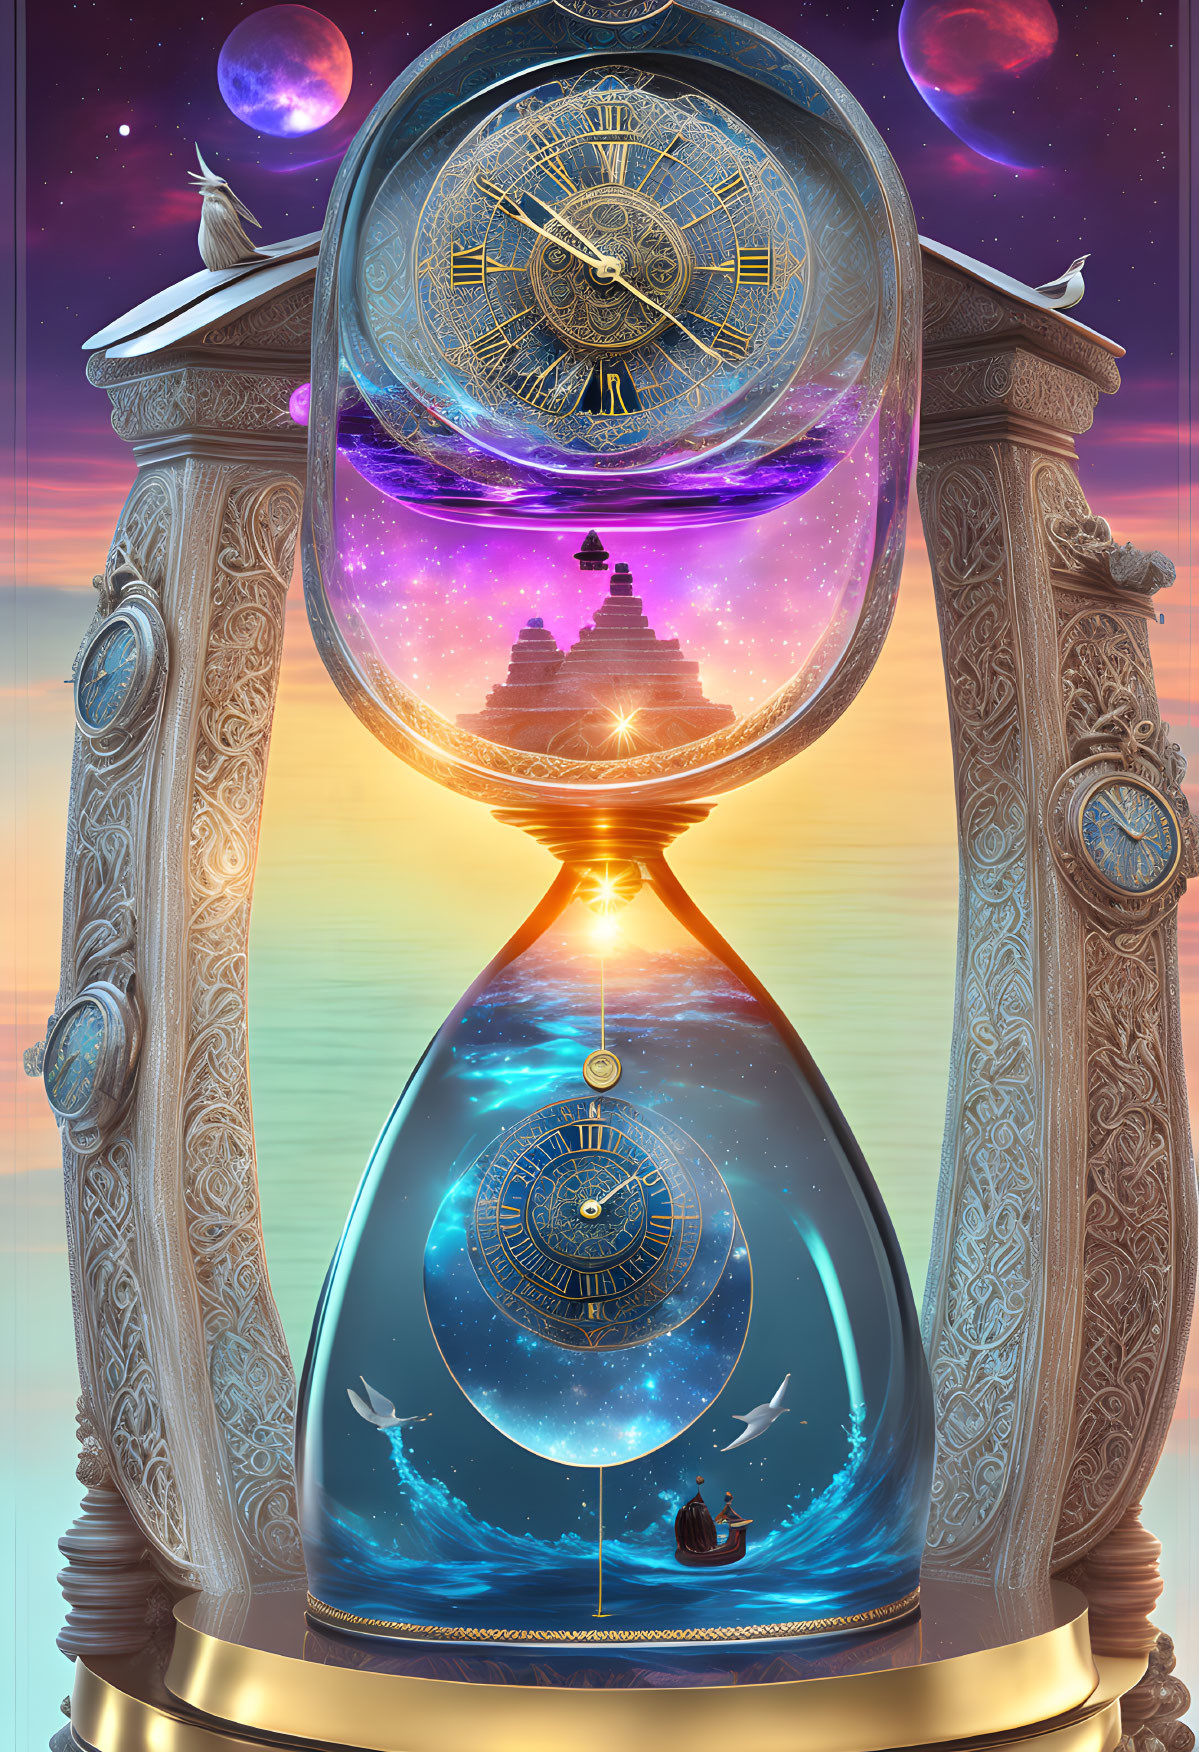 Ornate cosmic-themed hourglass with temple in sunset sky